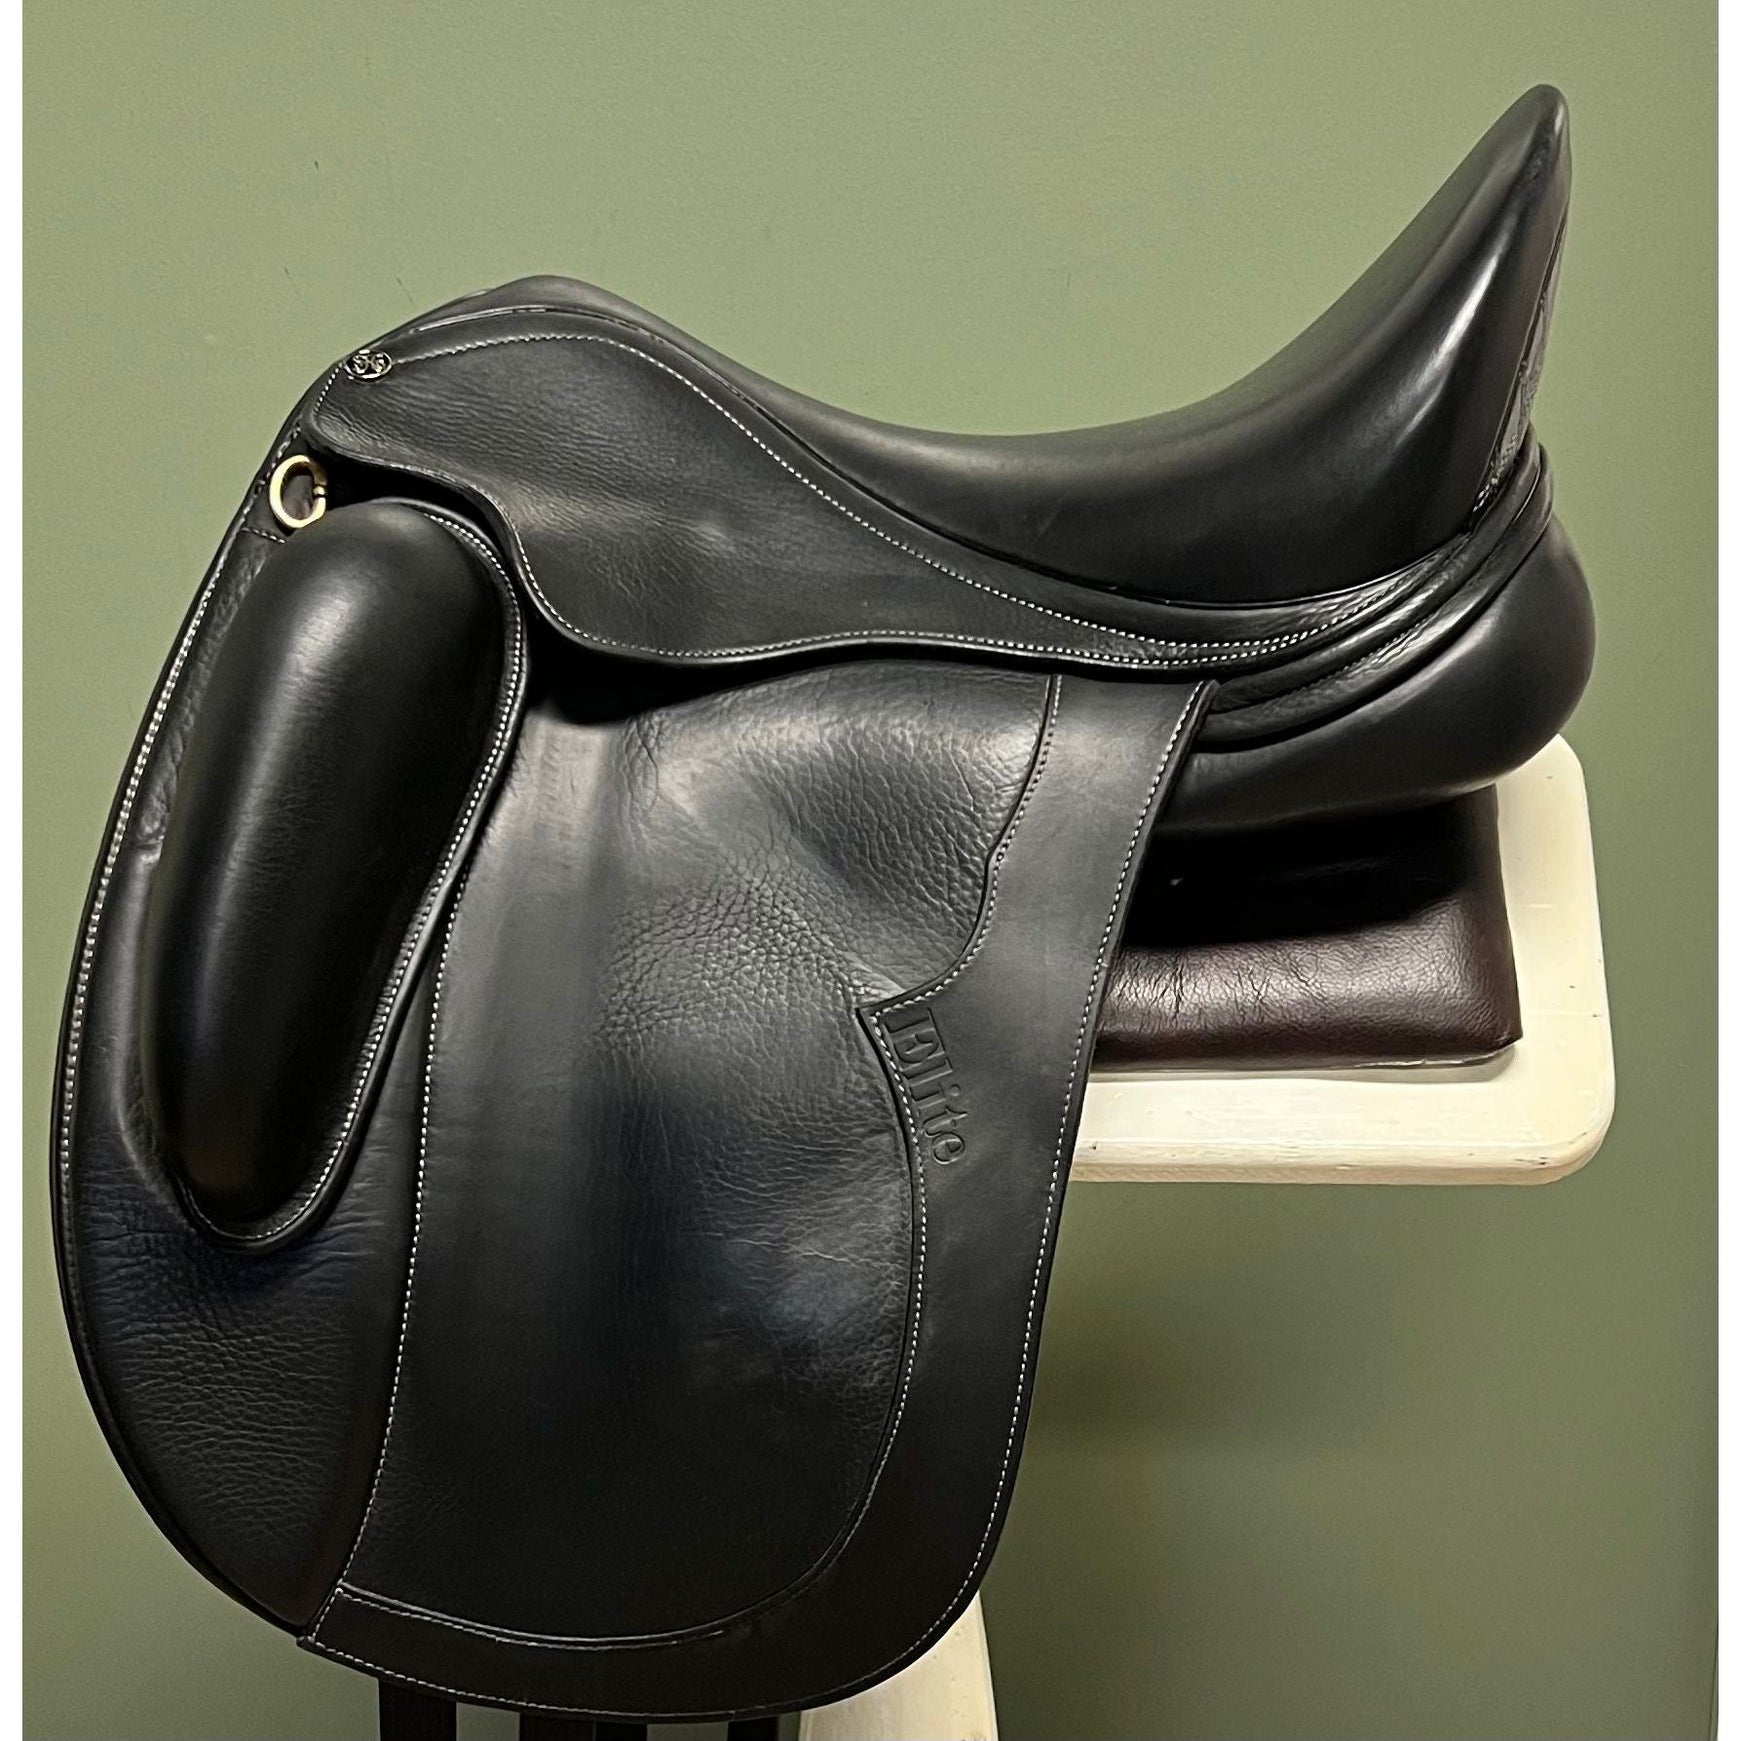 Pre-Loved StrideFree Elite Saddle -  Black with grey stitching and grey cross stitching in half moon. 17.5"